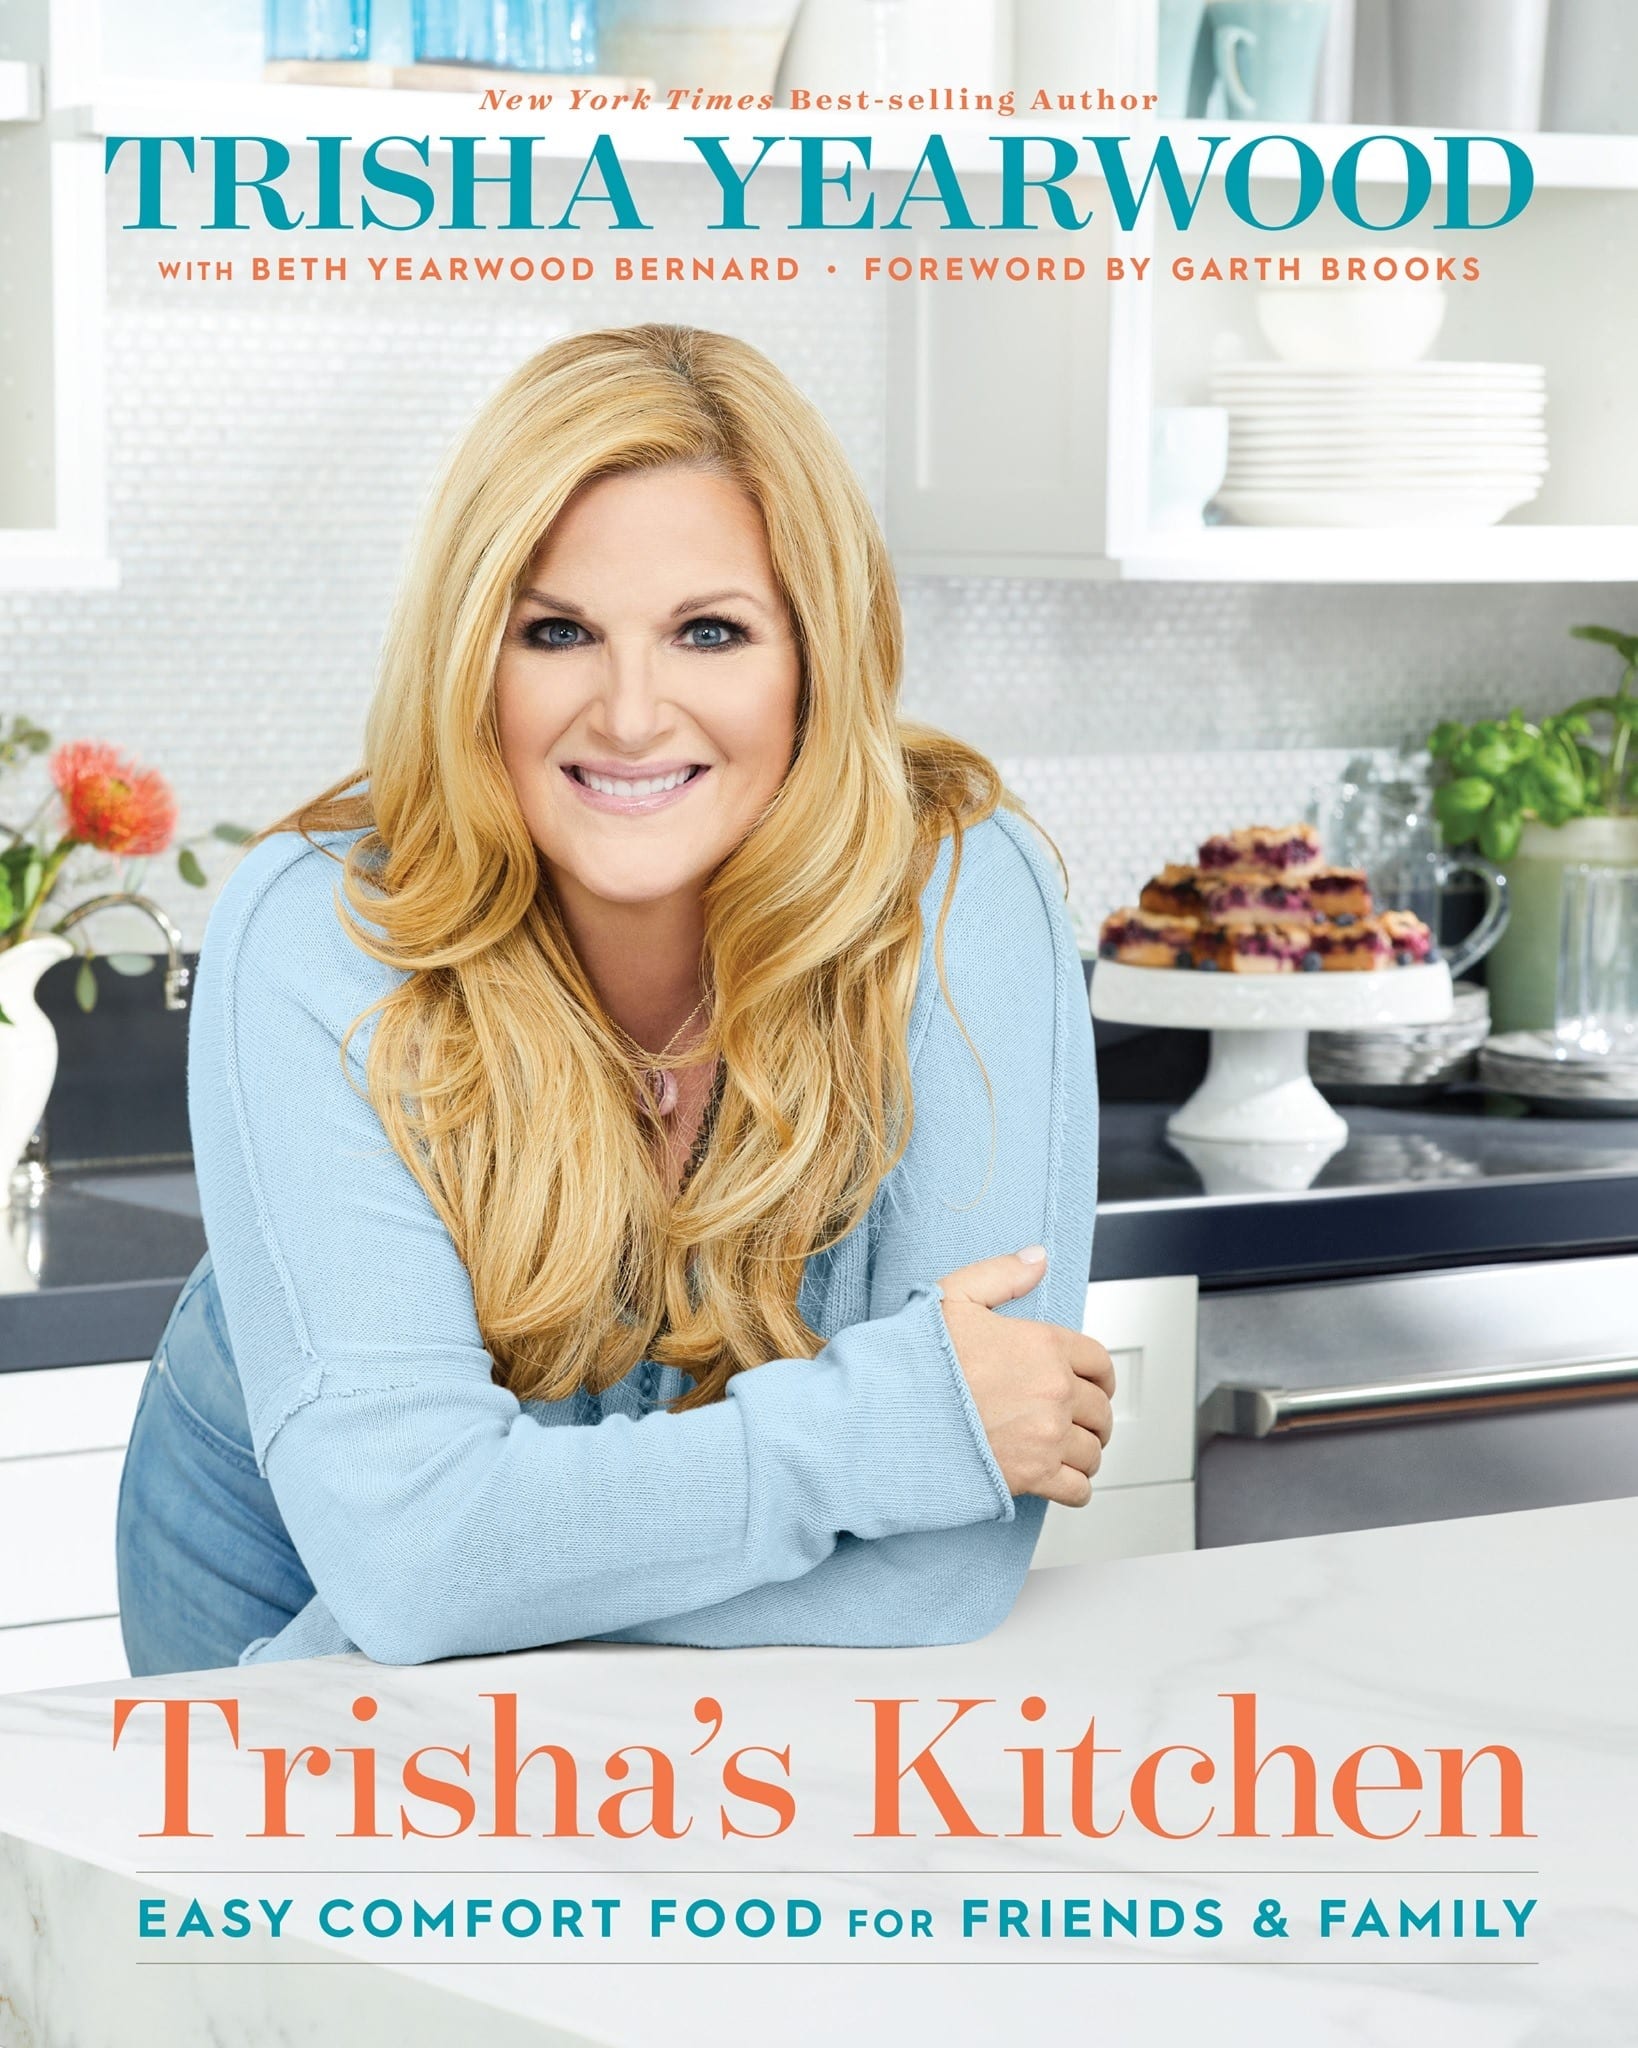 The cover of one of Trisha Yearwood's cookbooks with a foreword from her husband Garth Brooks